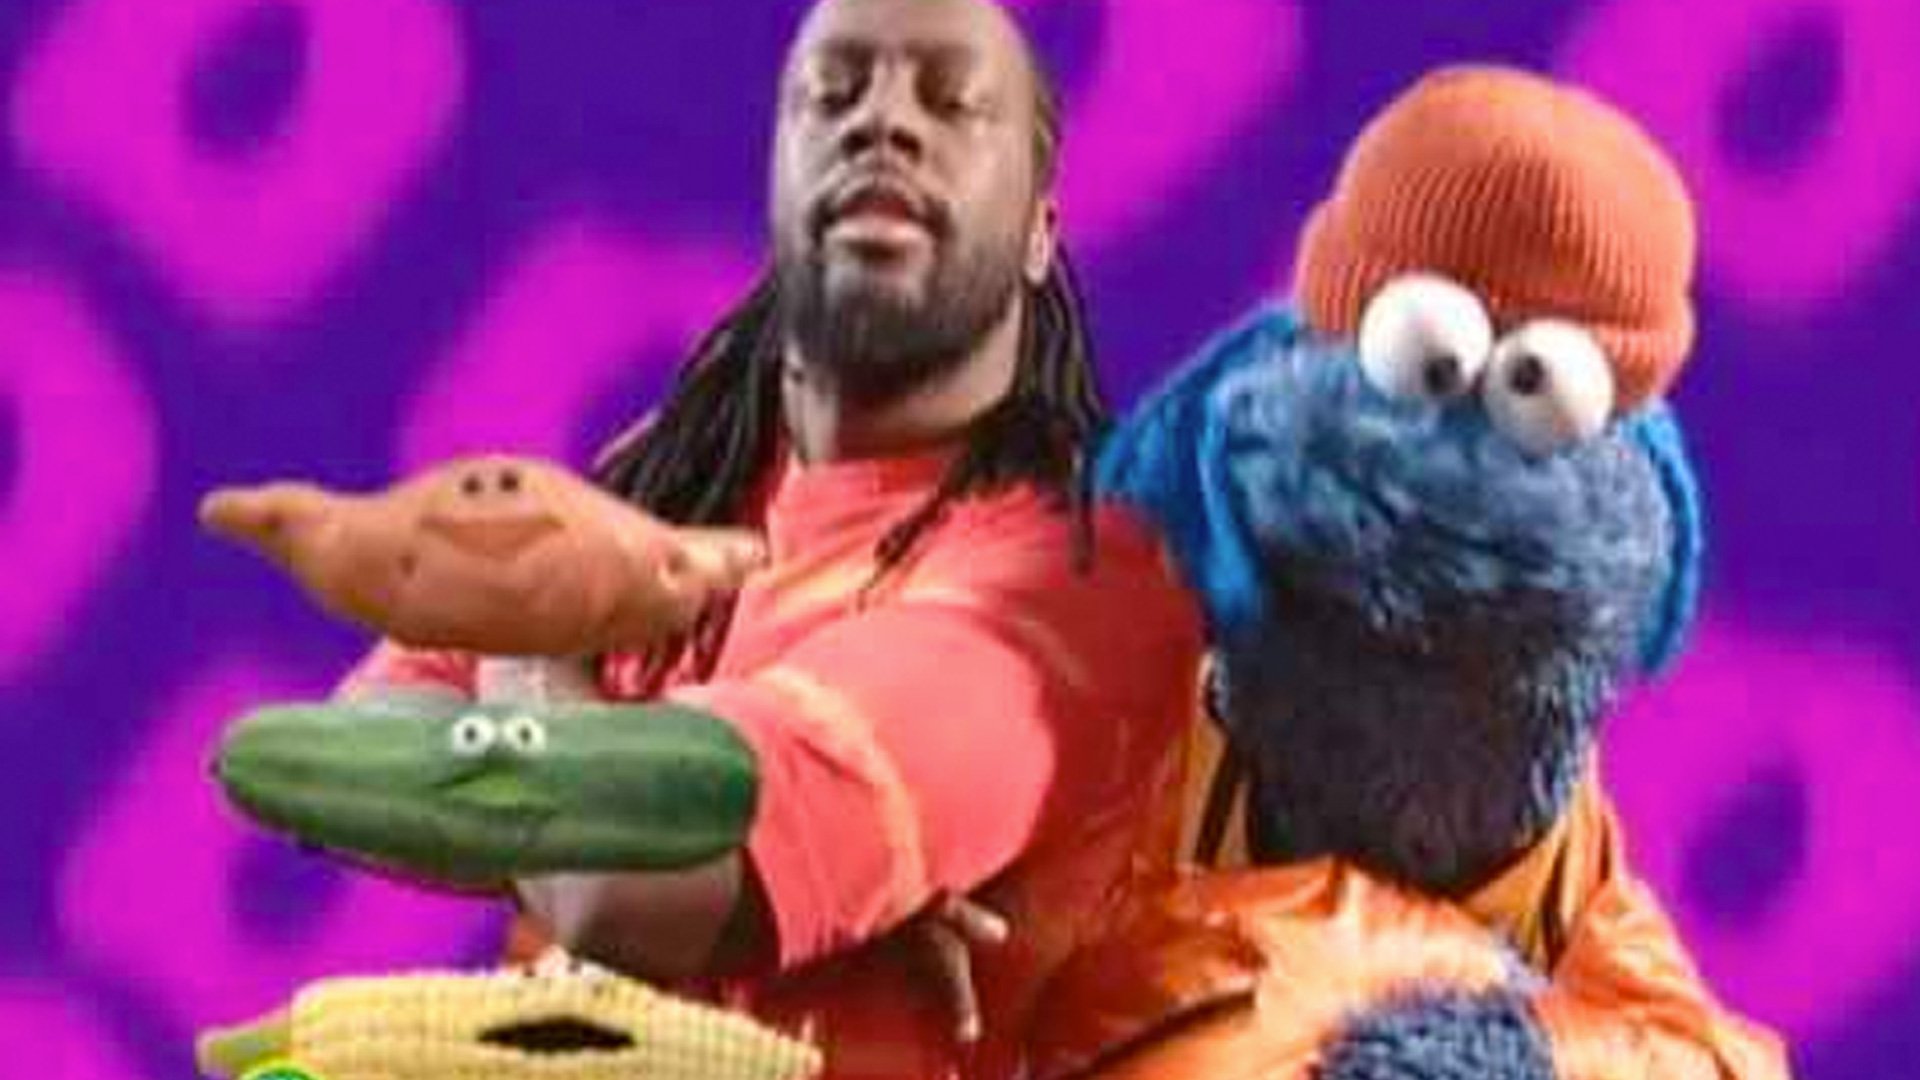 Wyclef Jean and Cookie Monster Sing About Healthy Food